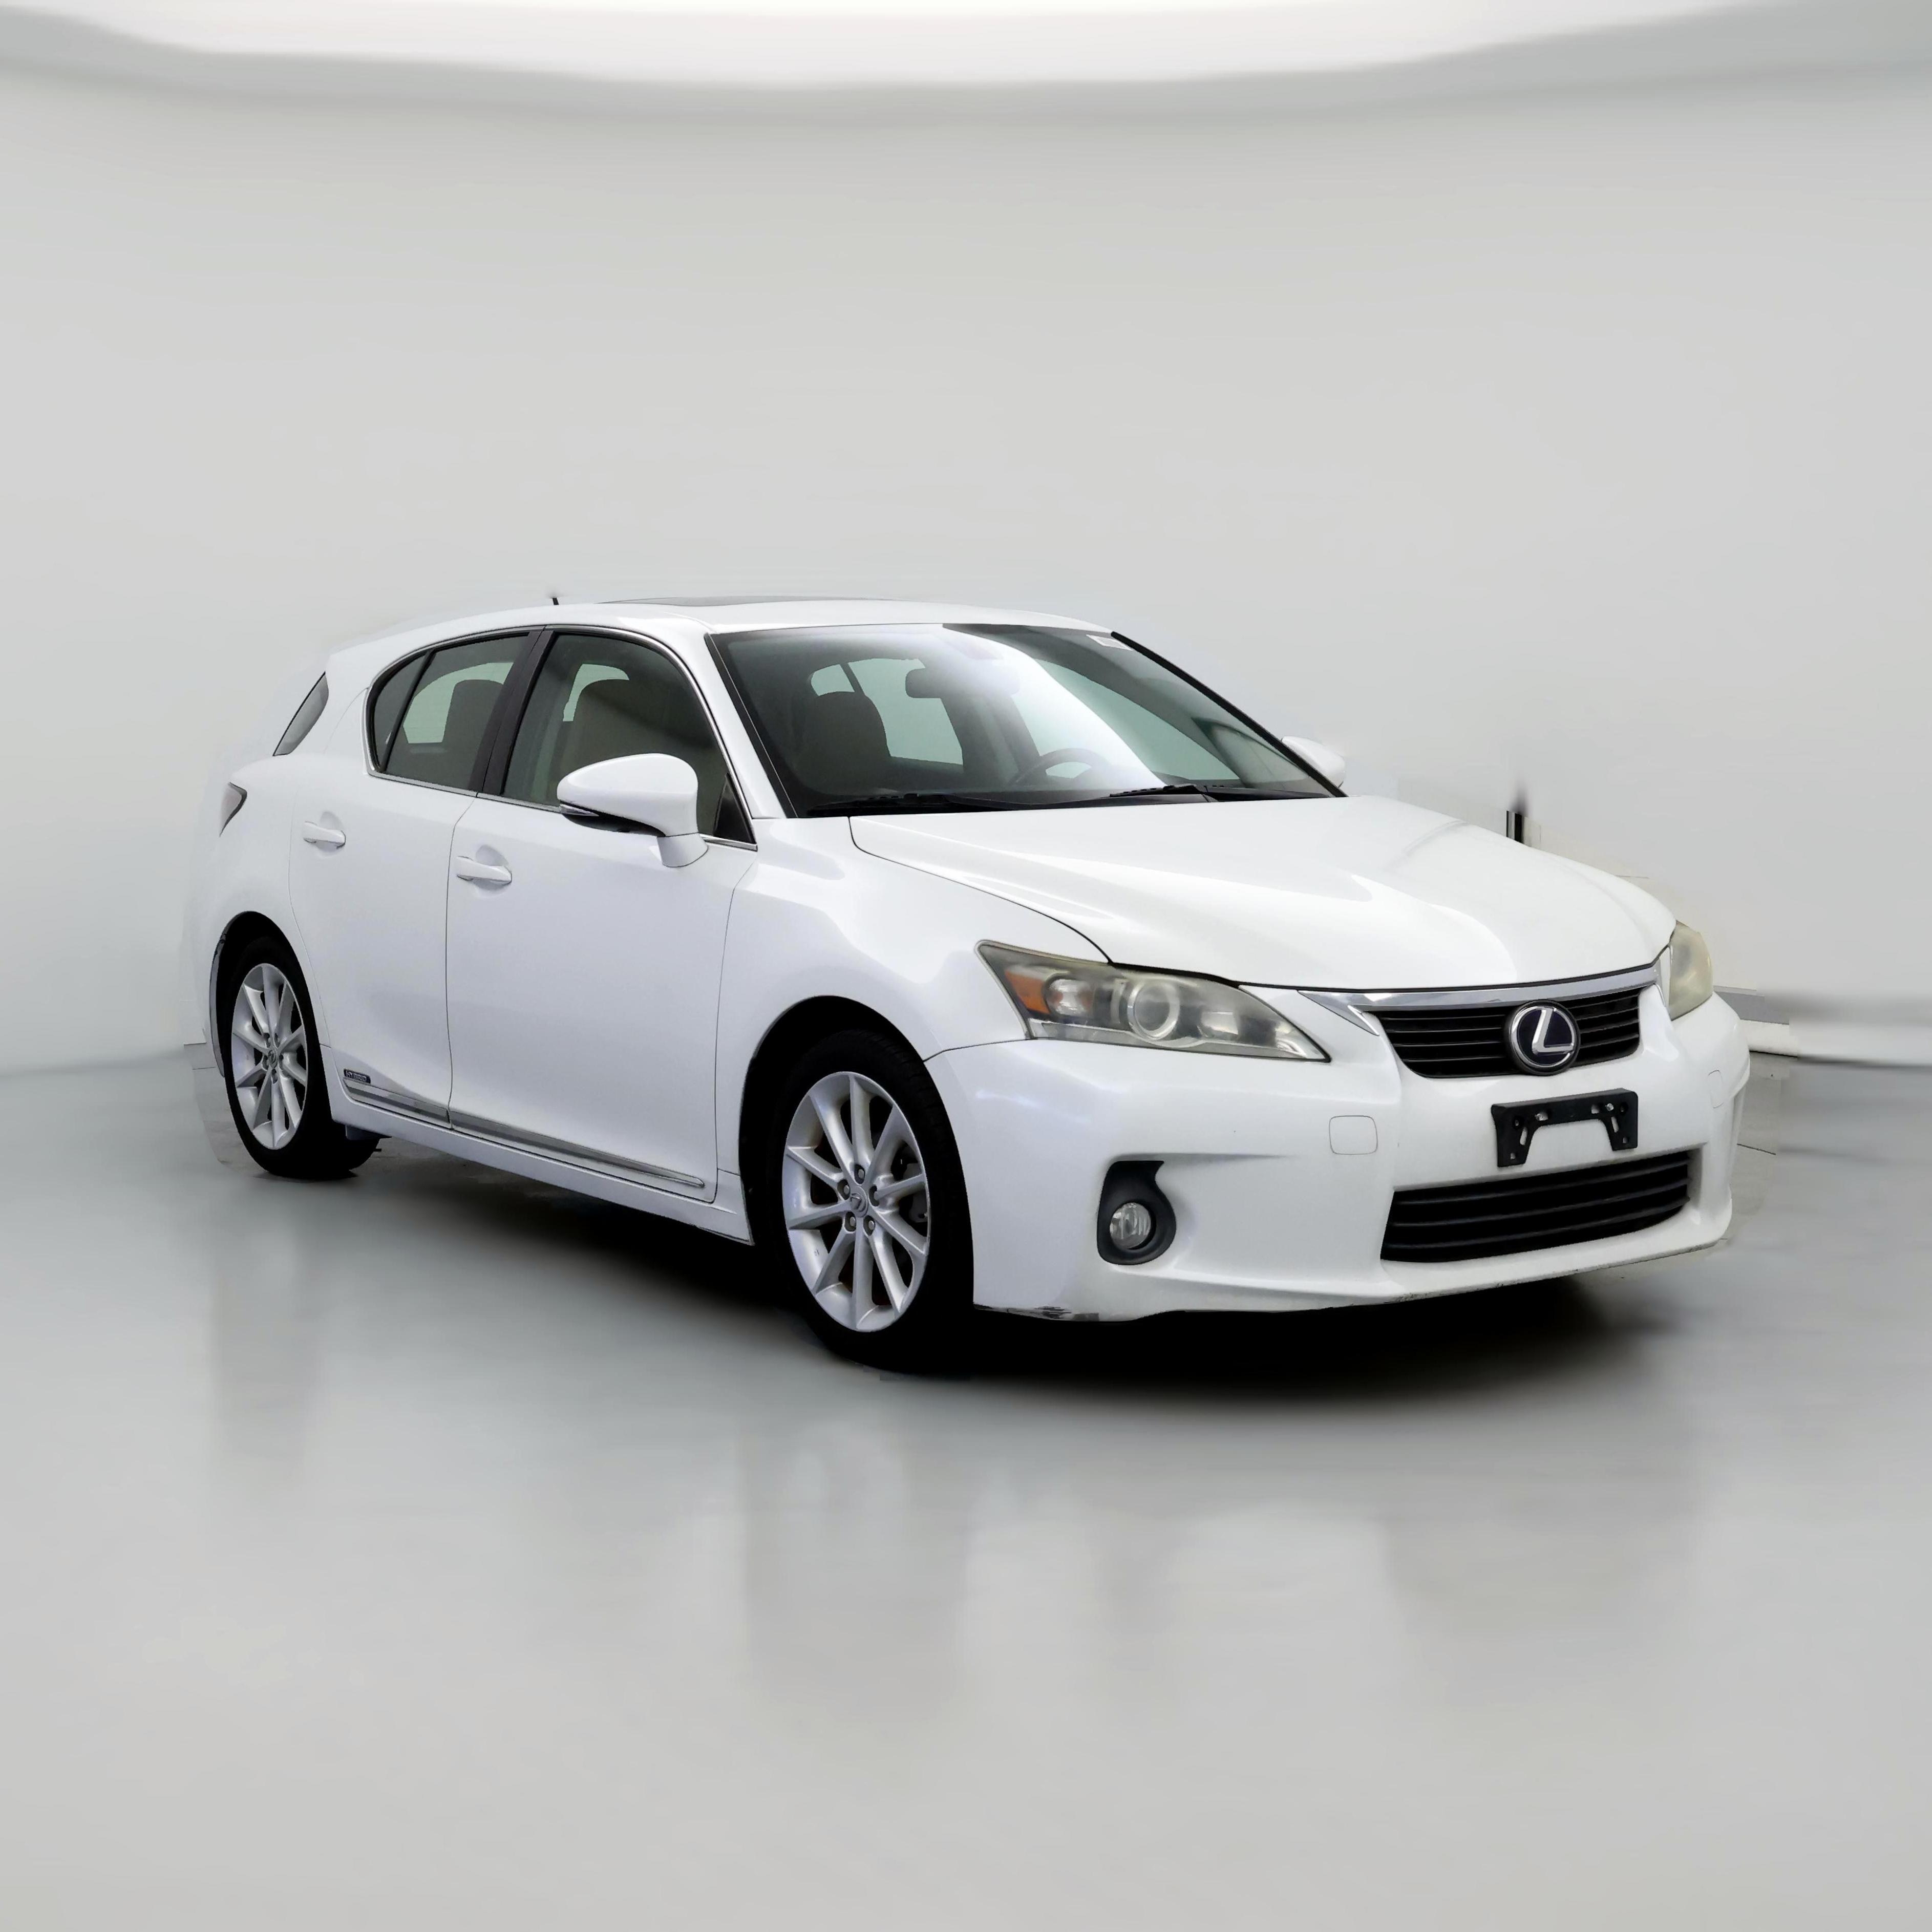 Used Lexus CT 200h for Sale